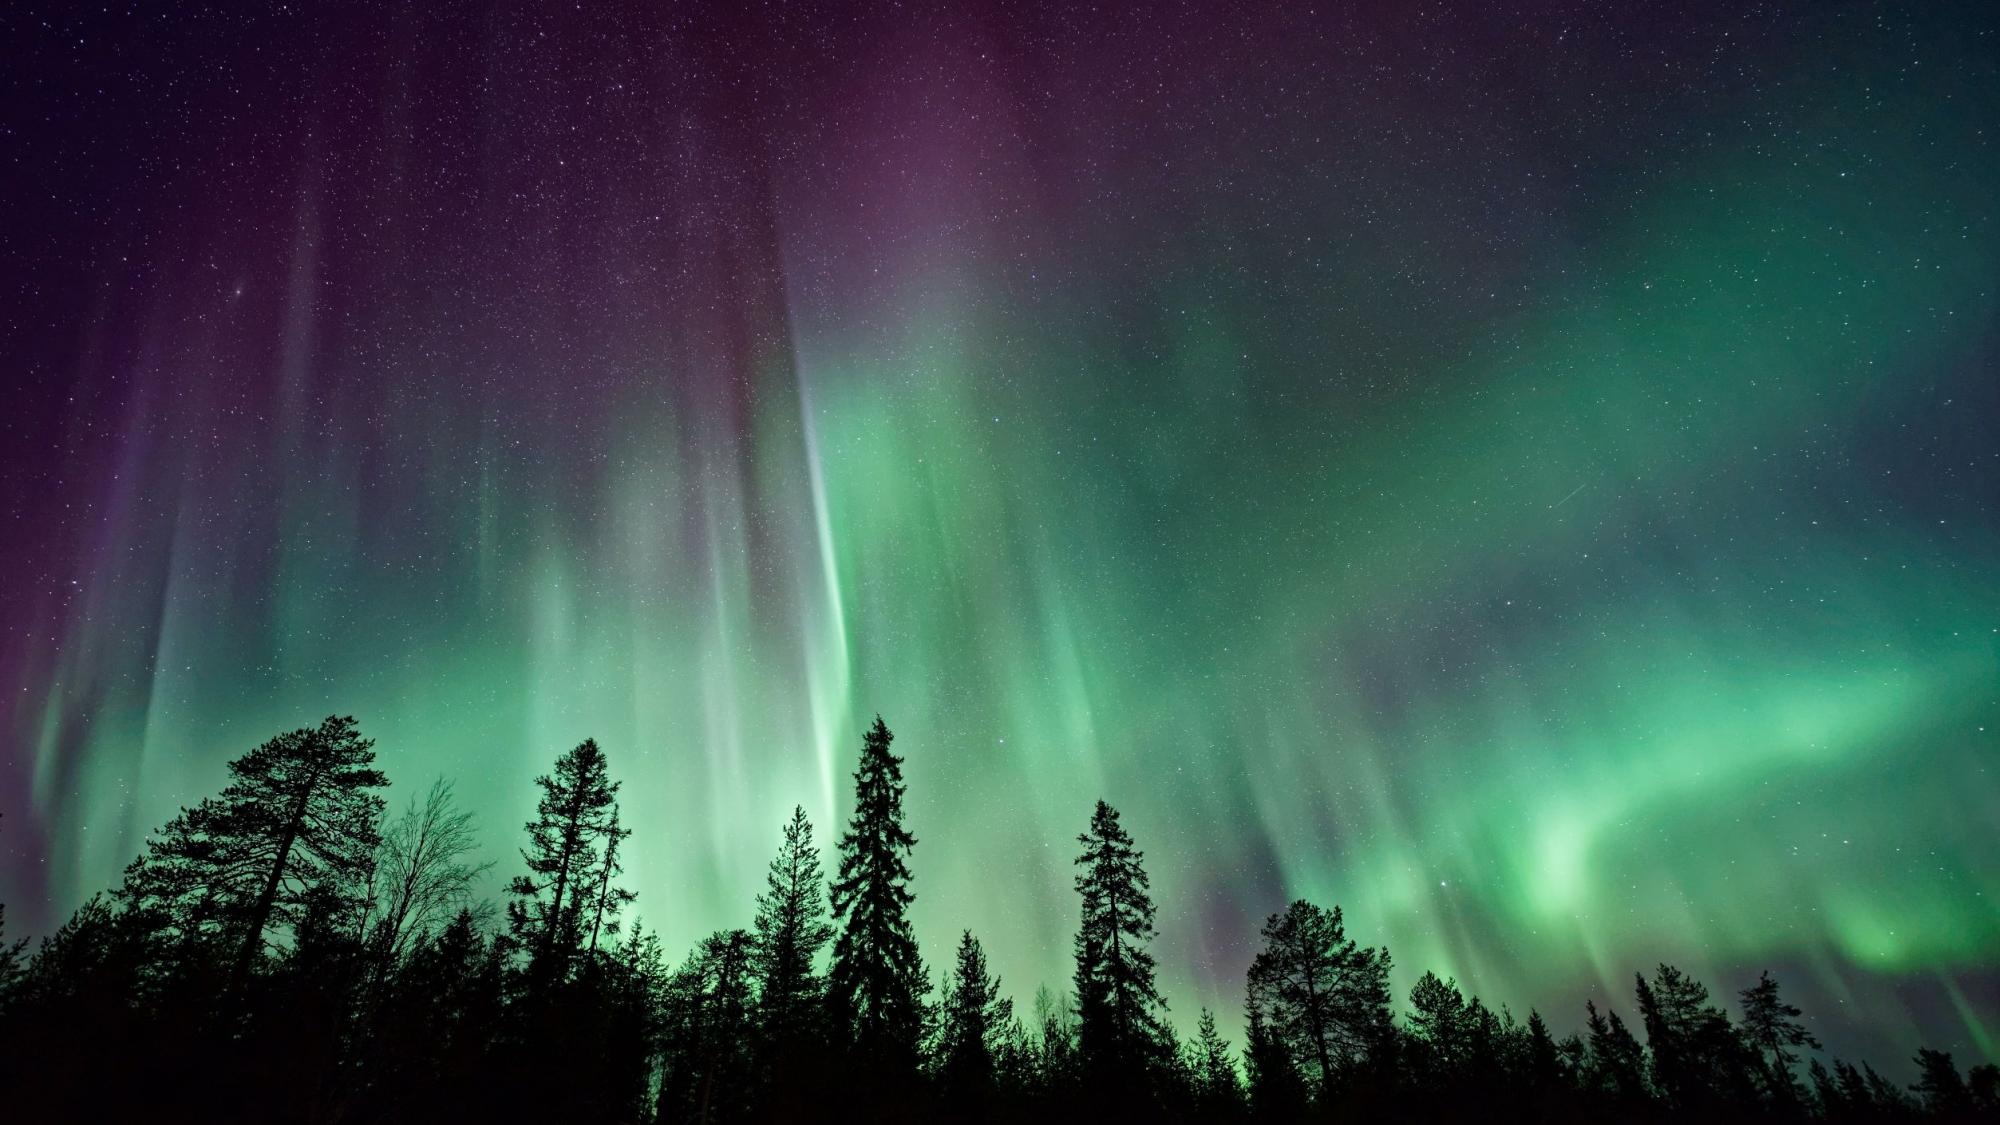 Silhouette of trees in front of Aurora Borealis at night